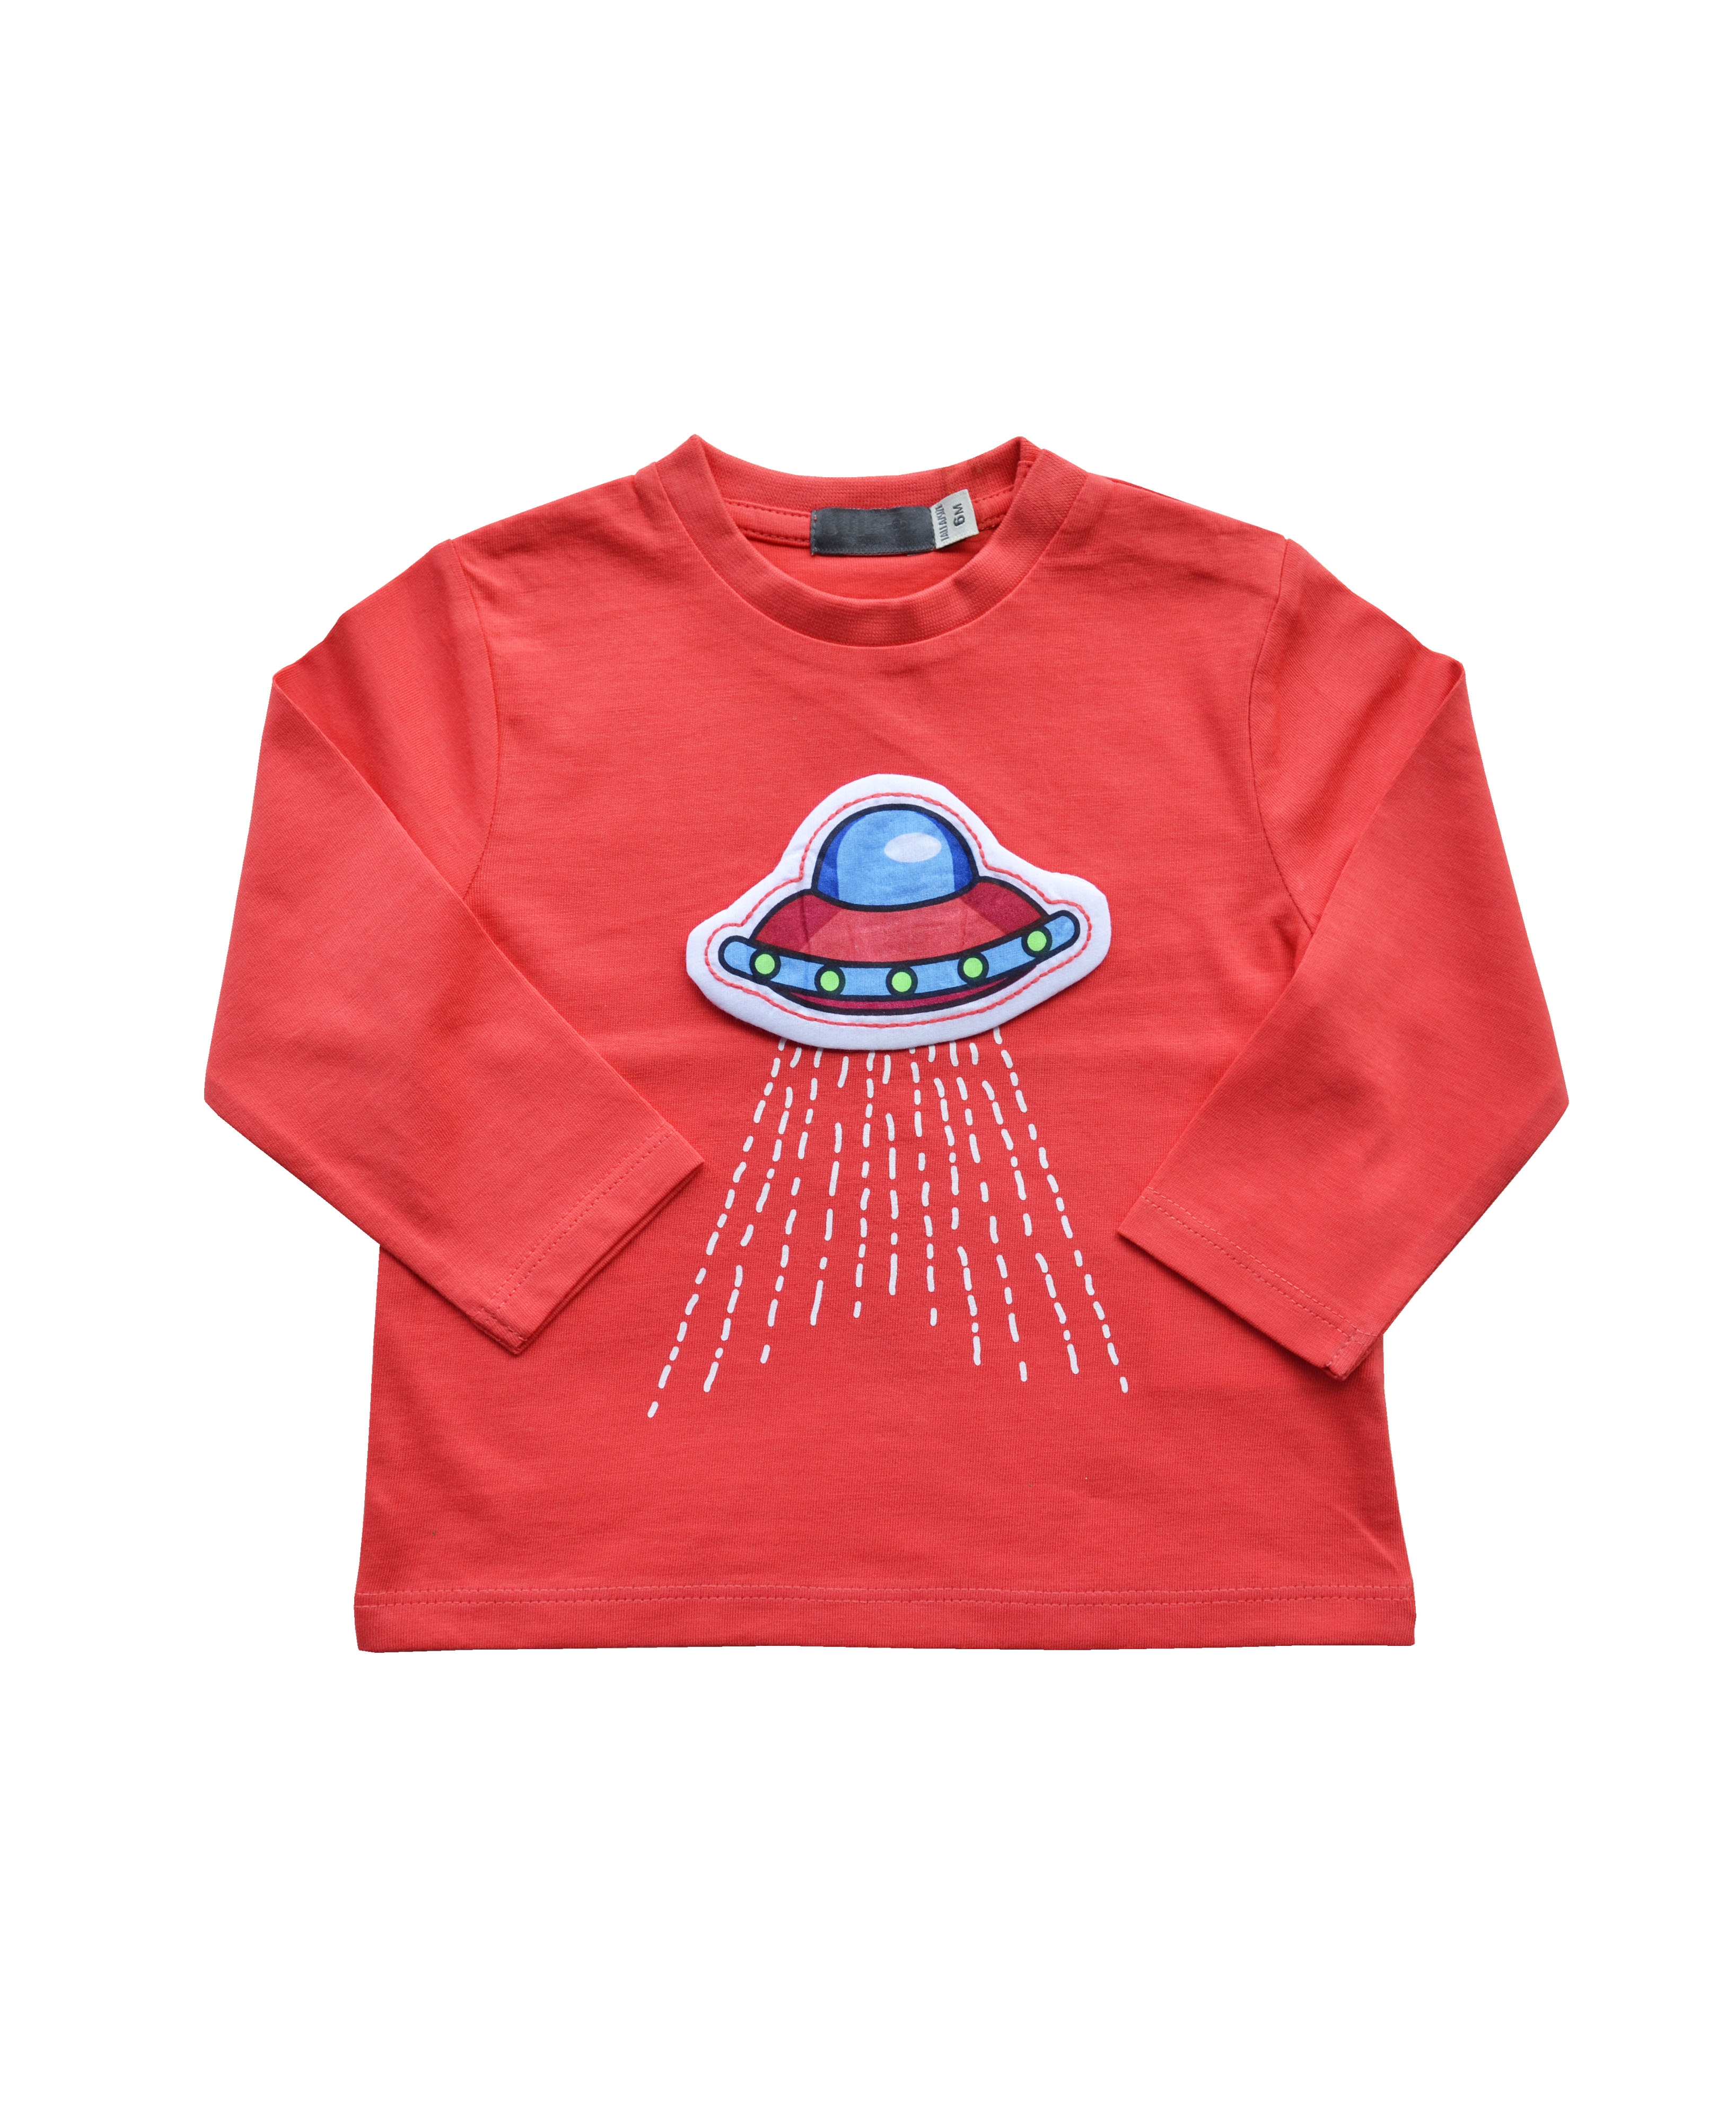 Red Top with Flying Saucer Applique at chest (100% Cotton Single Jersey)